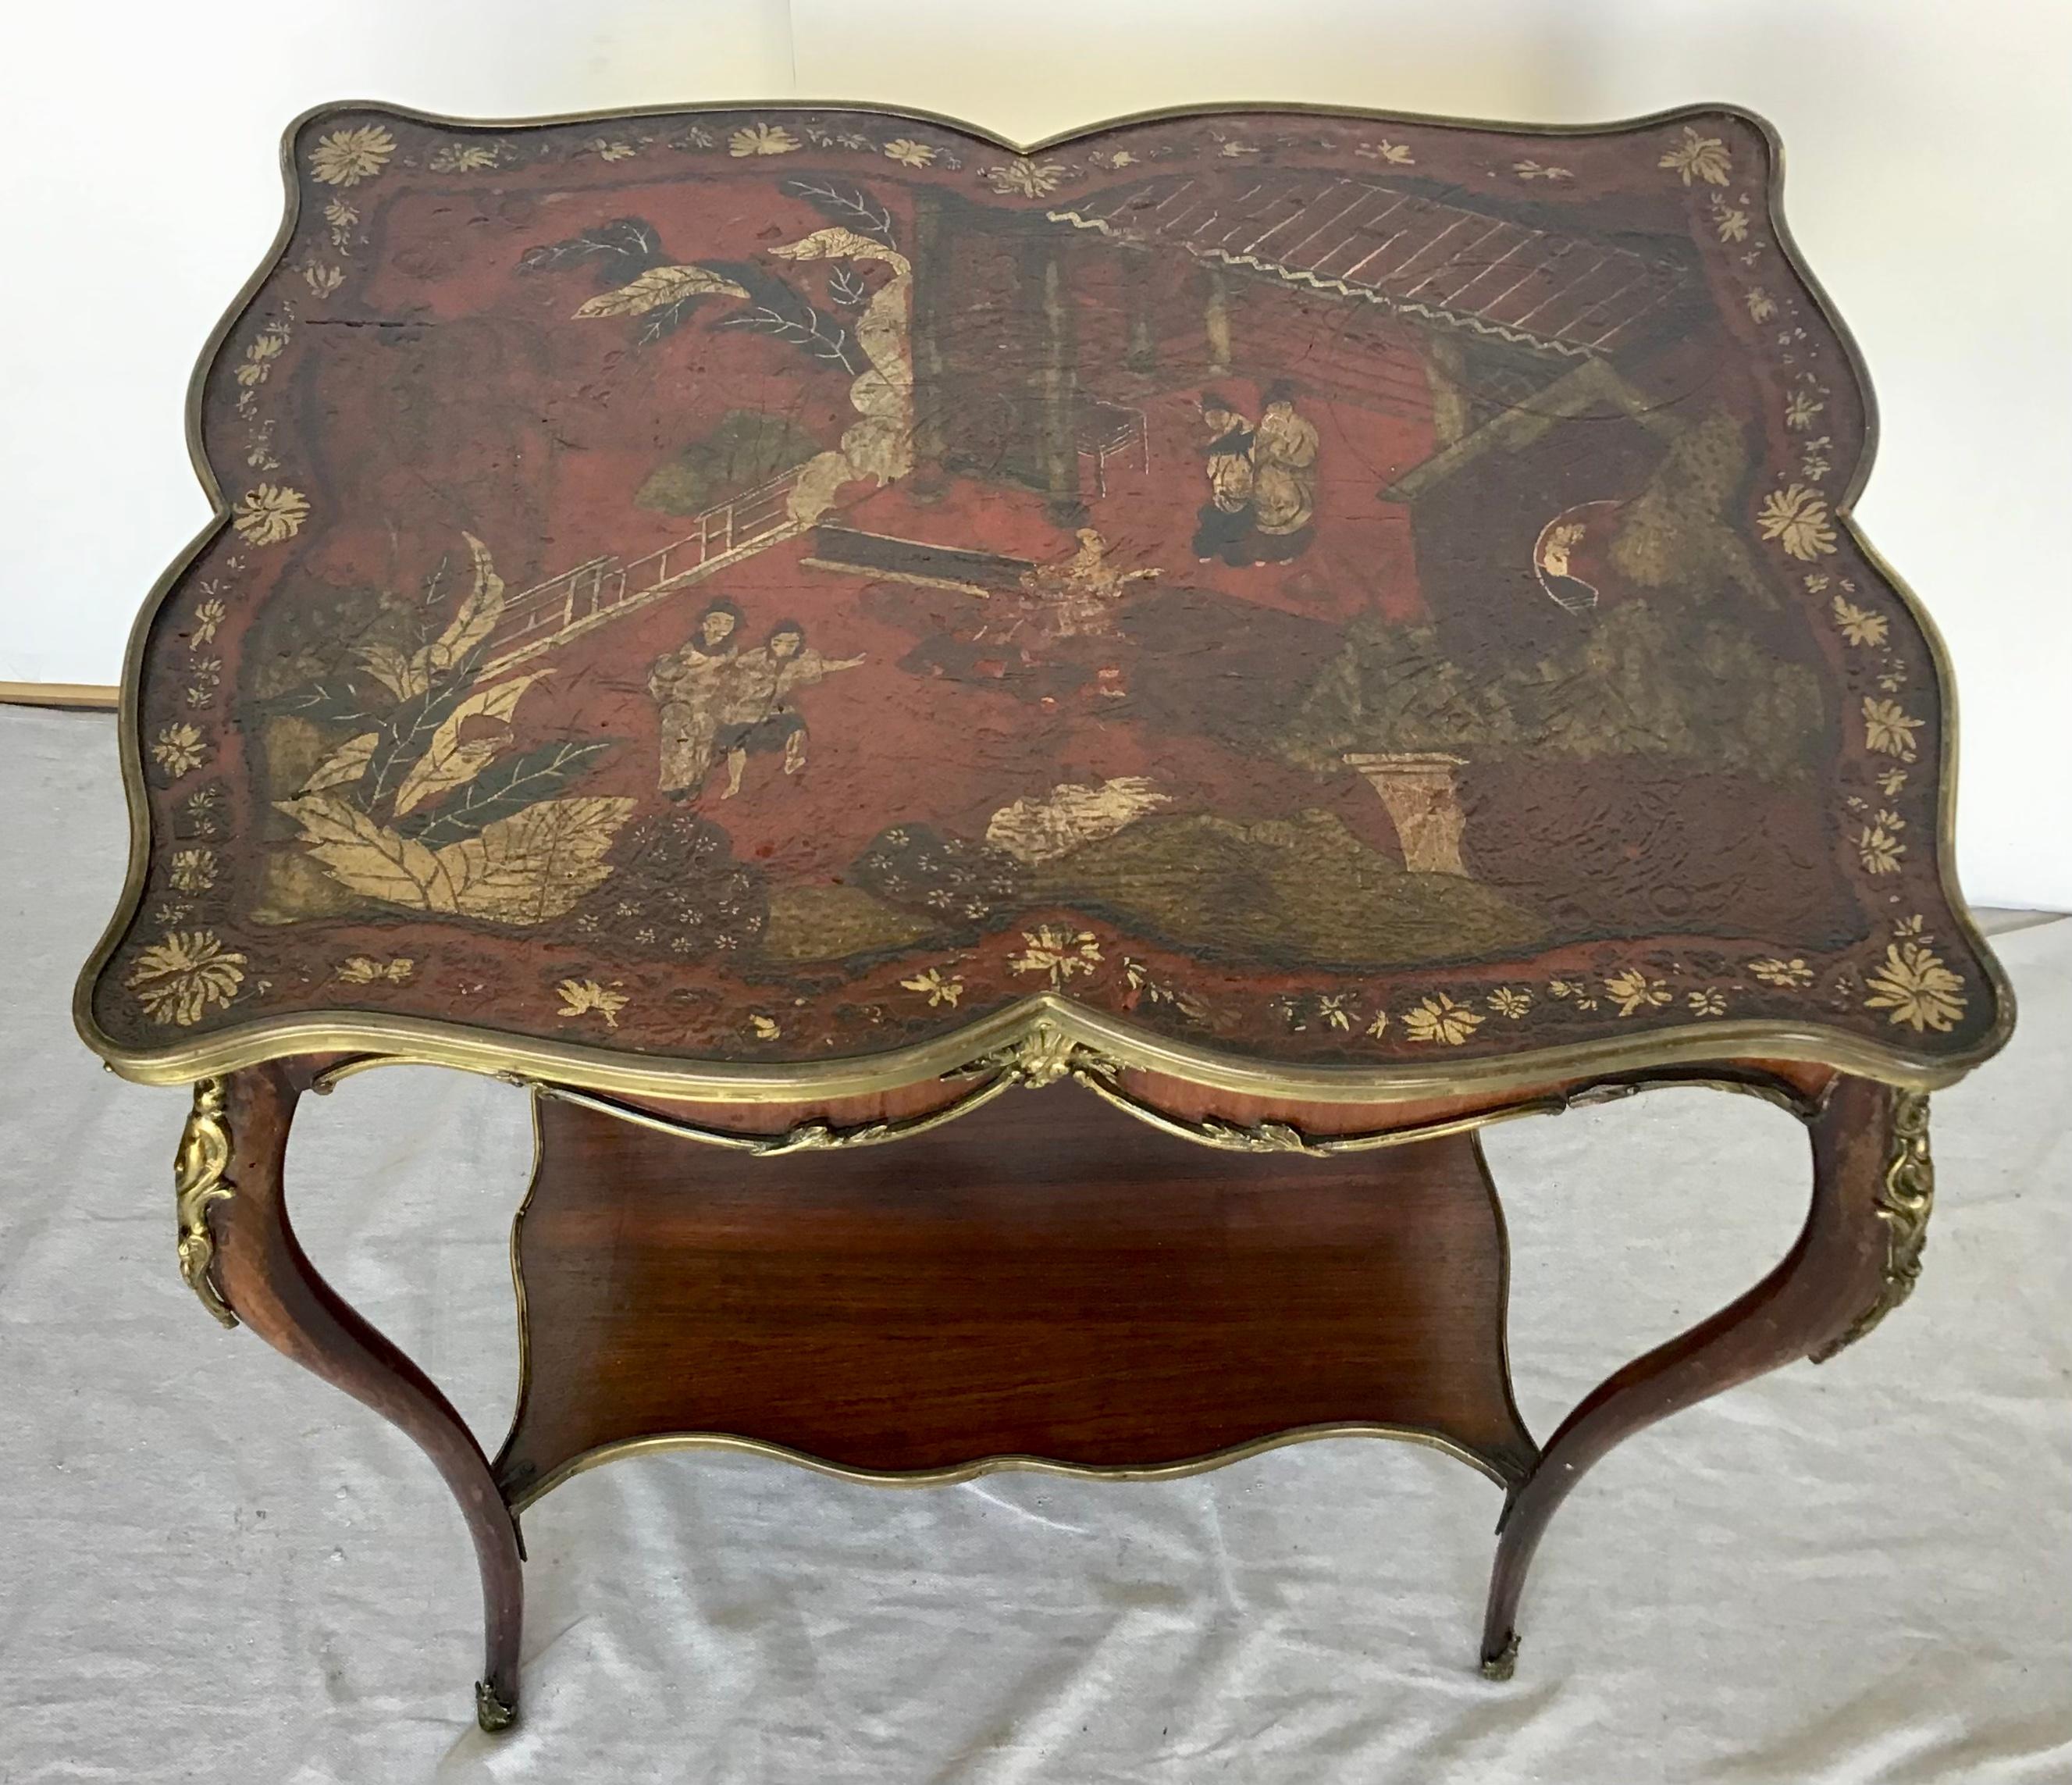 A very rare and unusual French Louis XV Chinoiserie lacquer, ormolu mounted side table, the lacquer leather top with bronze gallery, depicting a classical Chinese scene of a court scene and various figures walking down a path. Ormolu mounts all